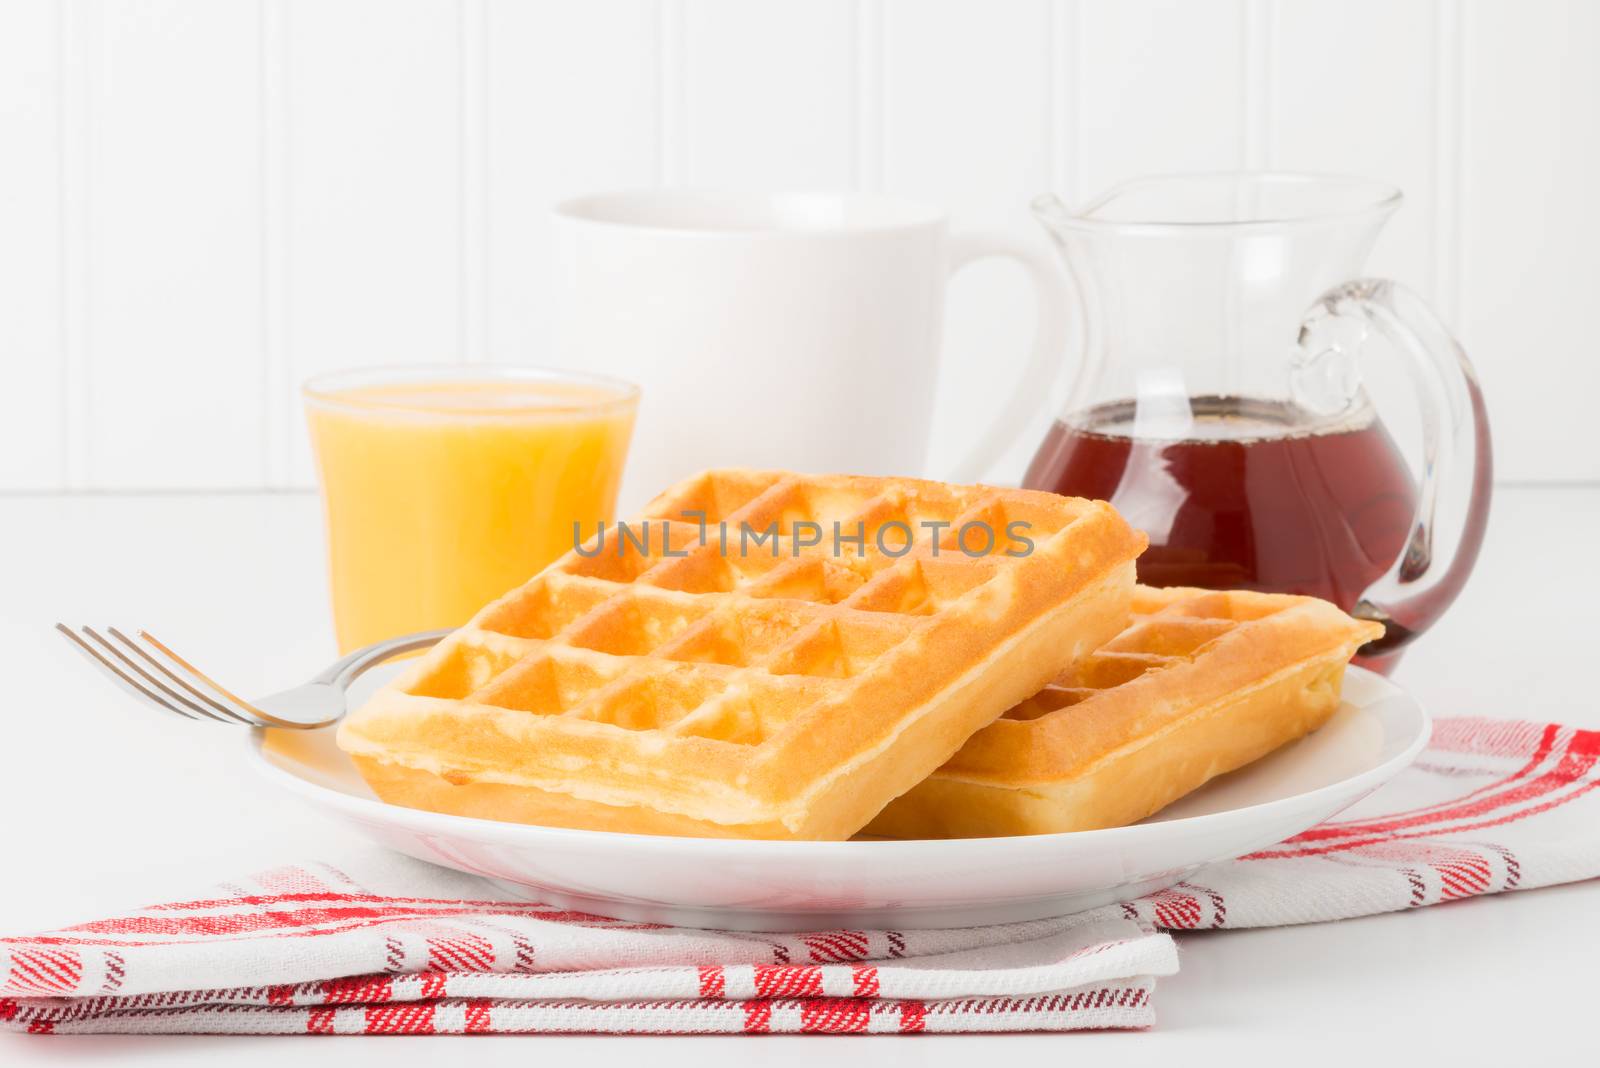 Fresh made waffles with maple syrup, coffee and juice.